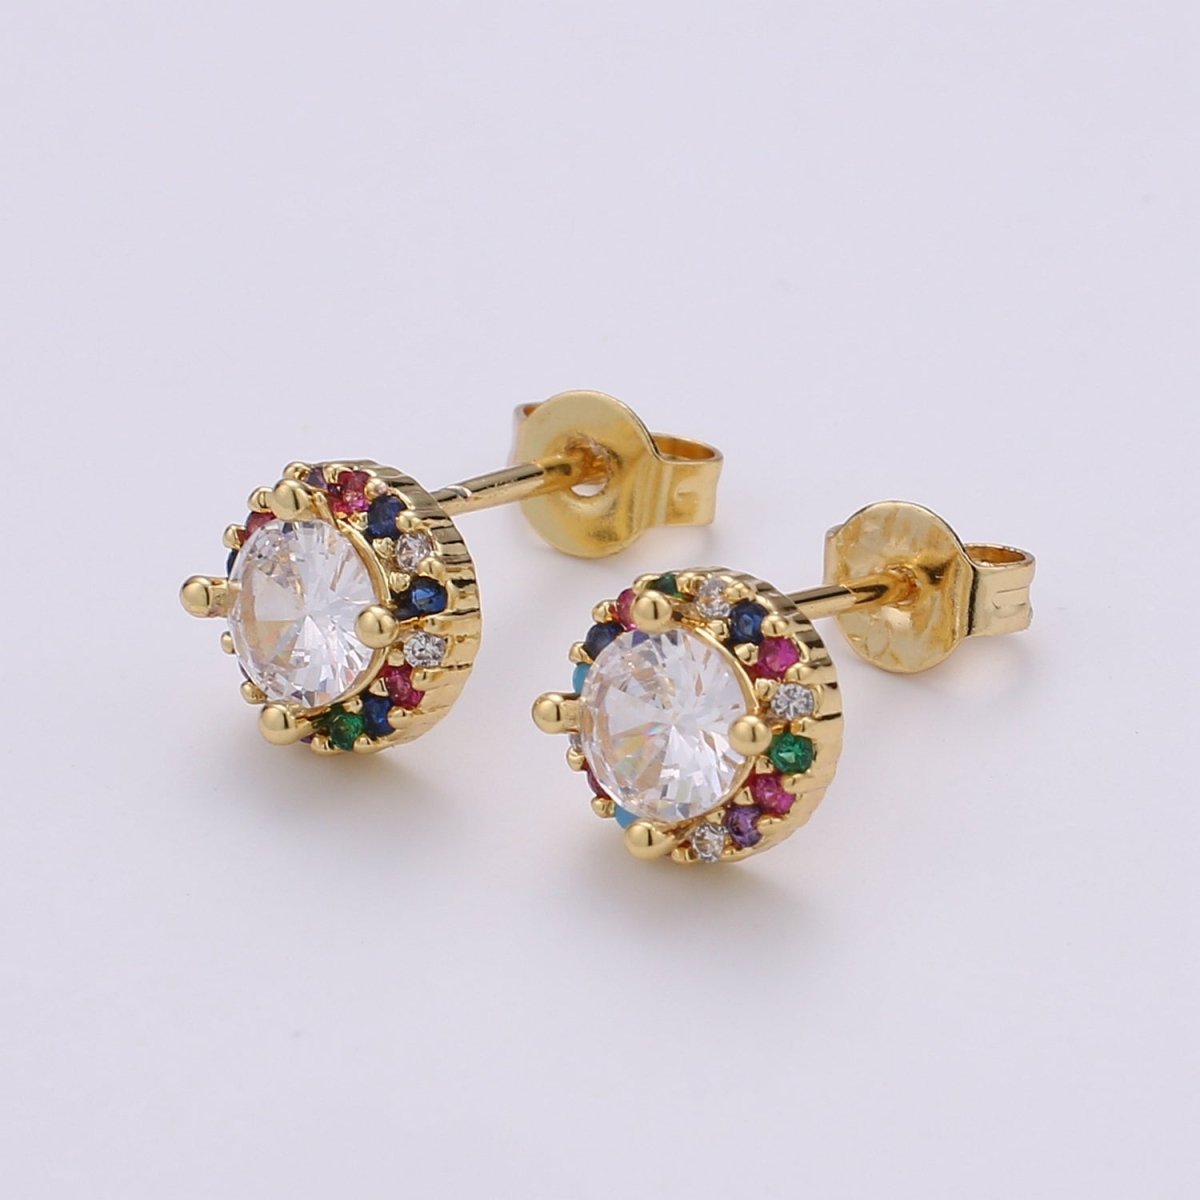 Gold Tiny Stud Earrings - Rainbow Micro Pave Studs - Dainty CZ Studs -5mm Round Crystal Small Stud Earrings Q-298 - DLUXCA